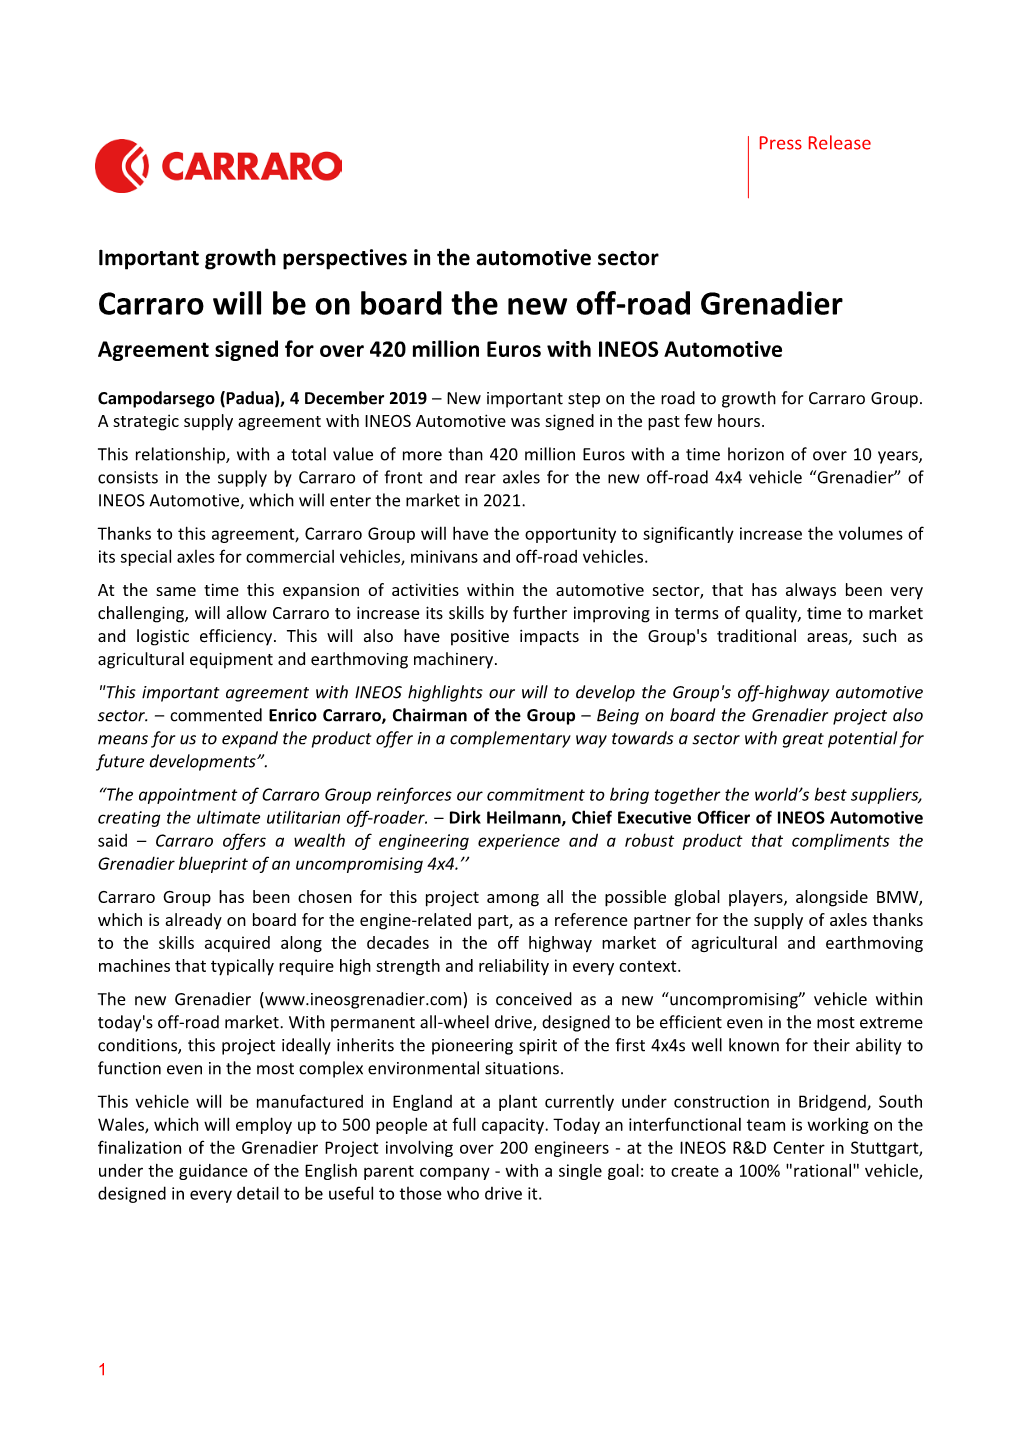 Carraro Will Be on Board the New Off-Road Grenadier Agreement Signed for Over 420 Million Euros with INEOS Automotive